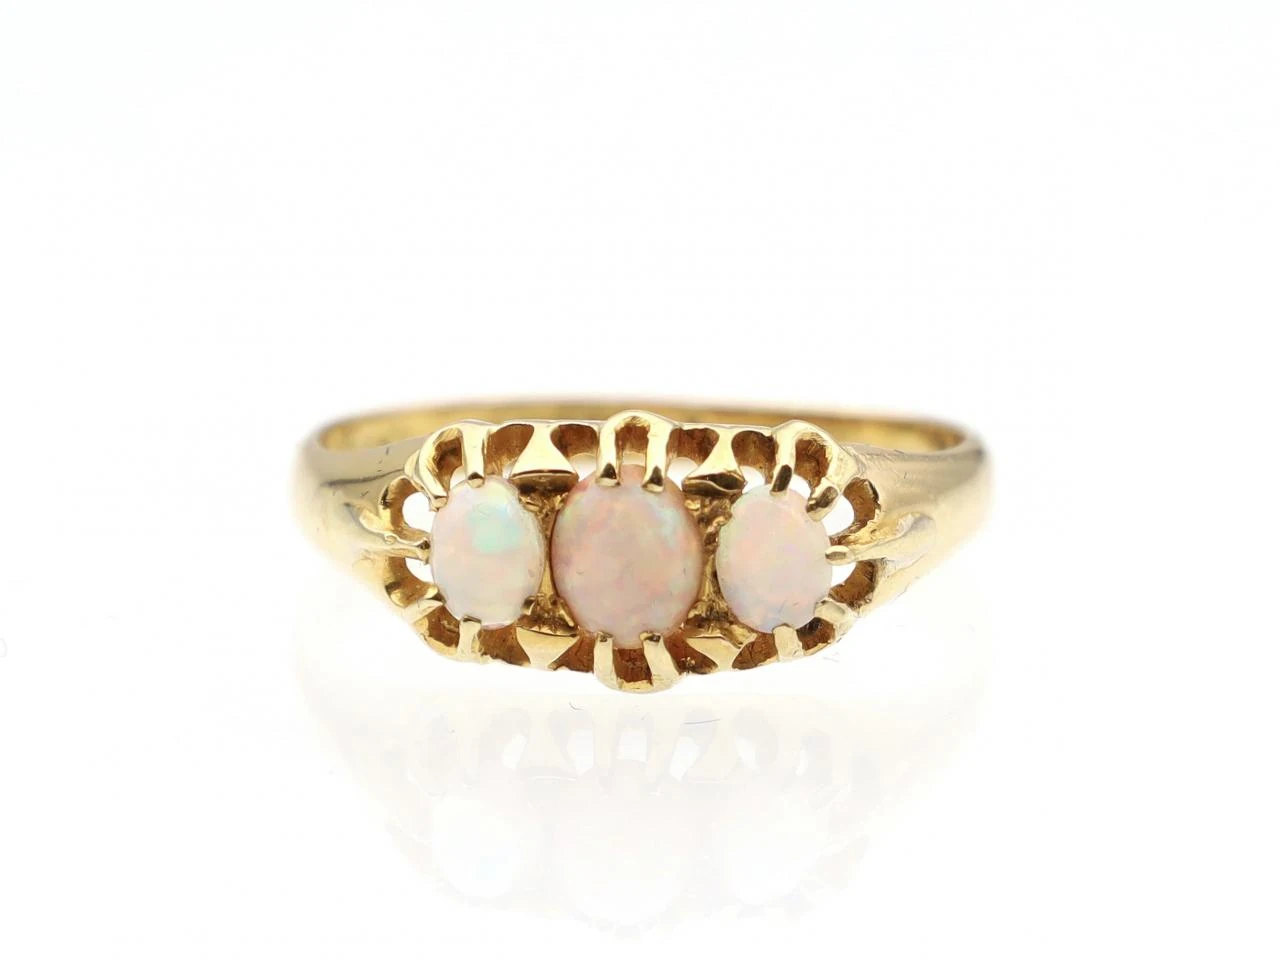 1912 three stone opal carved ring in 18kt yellow gold